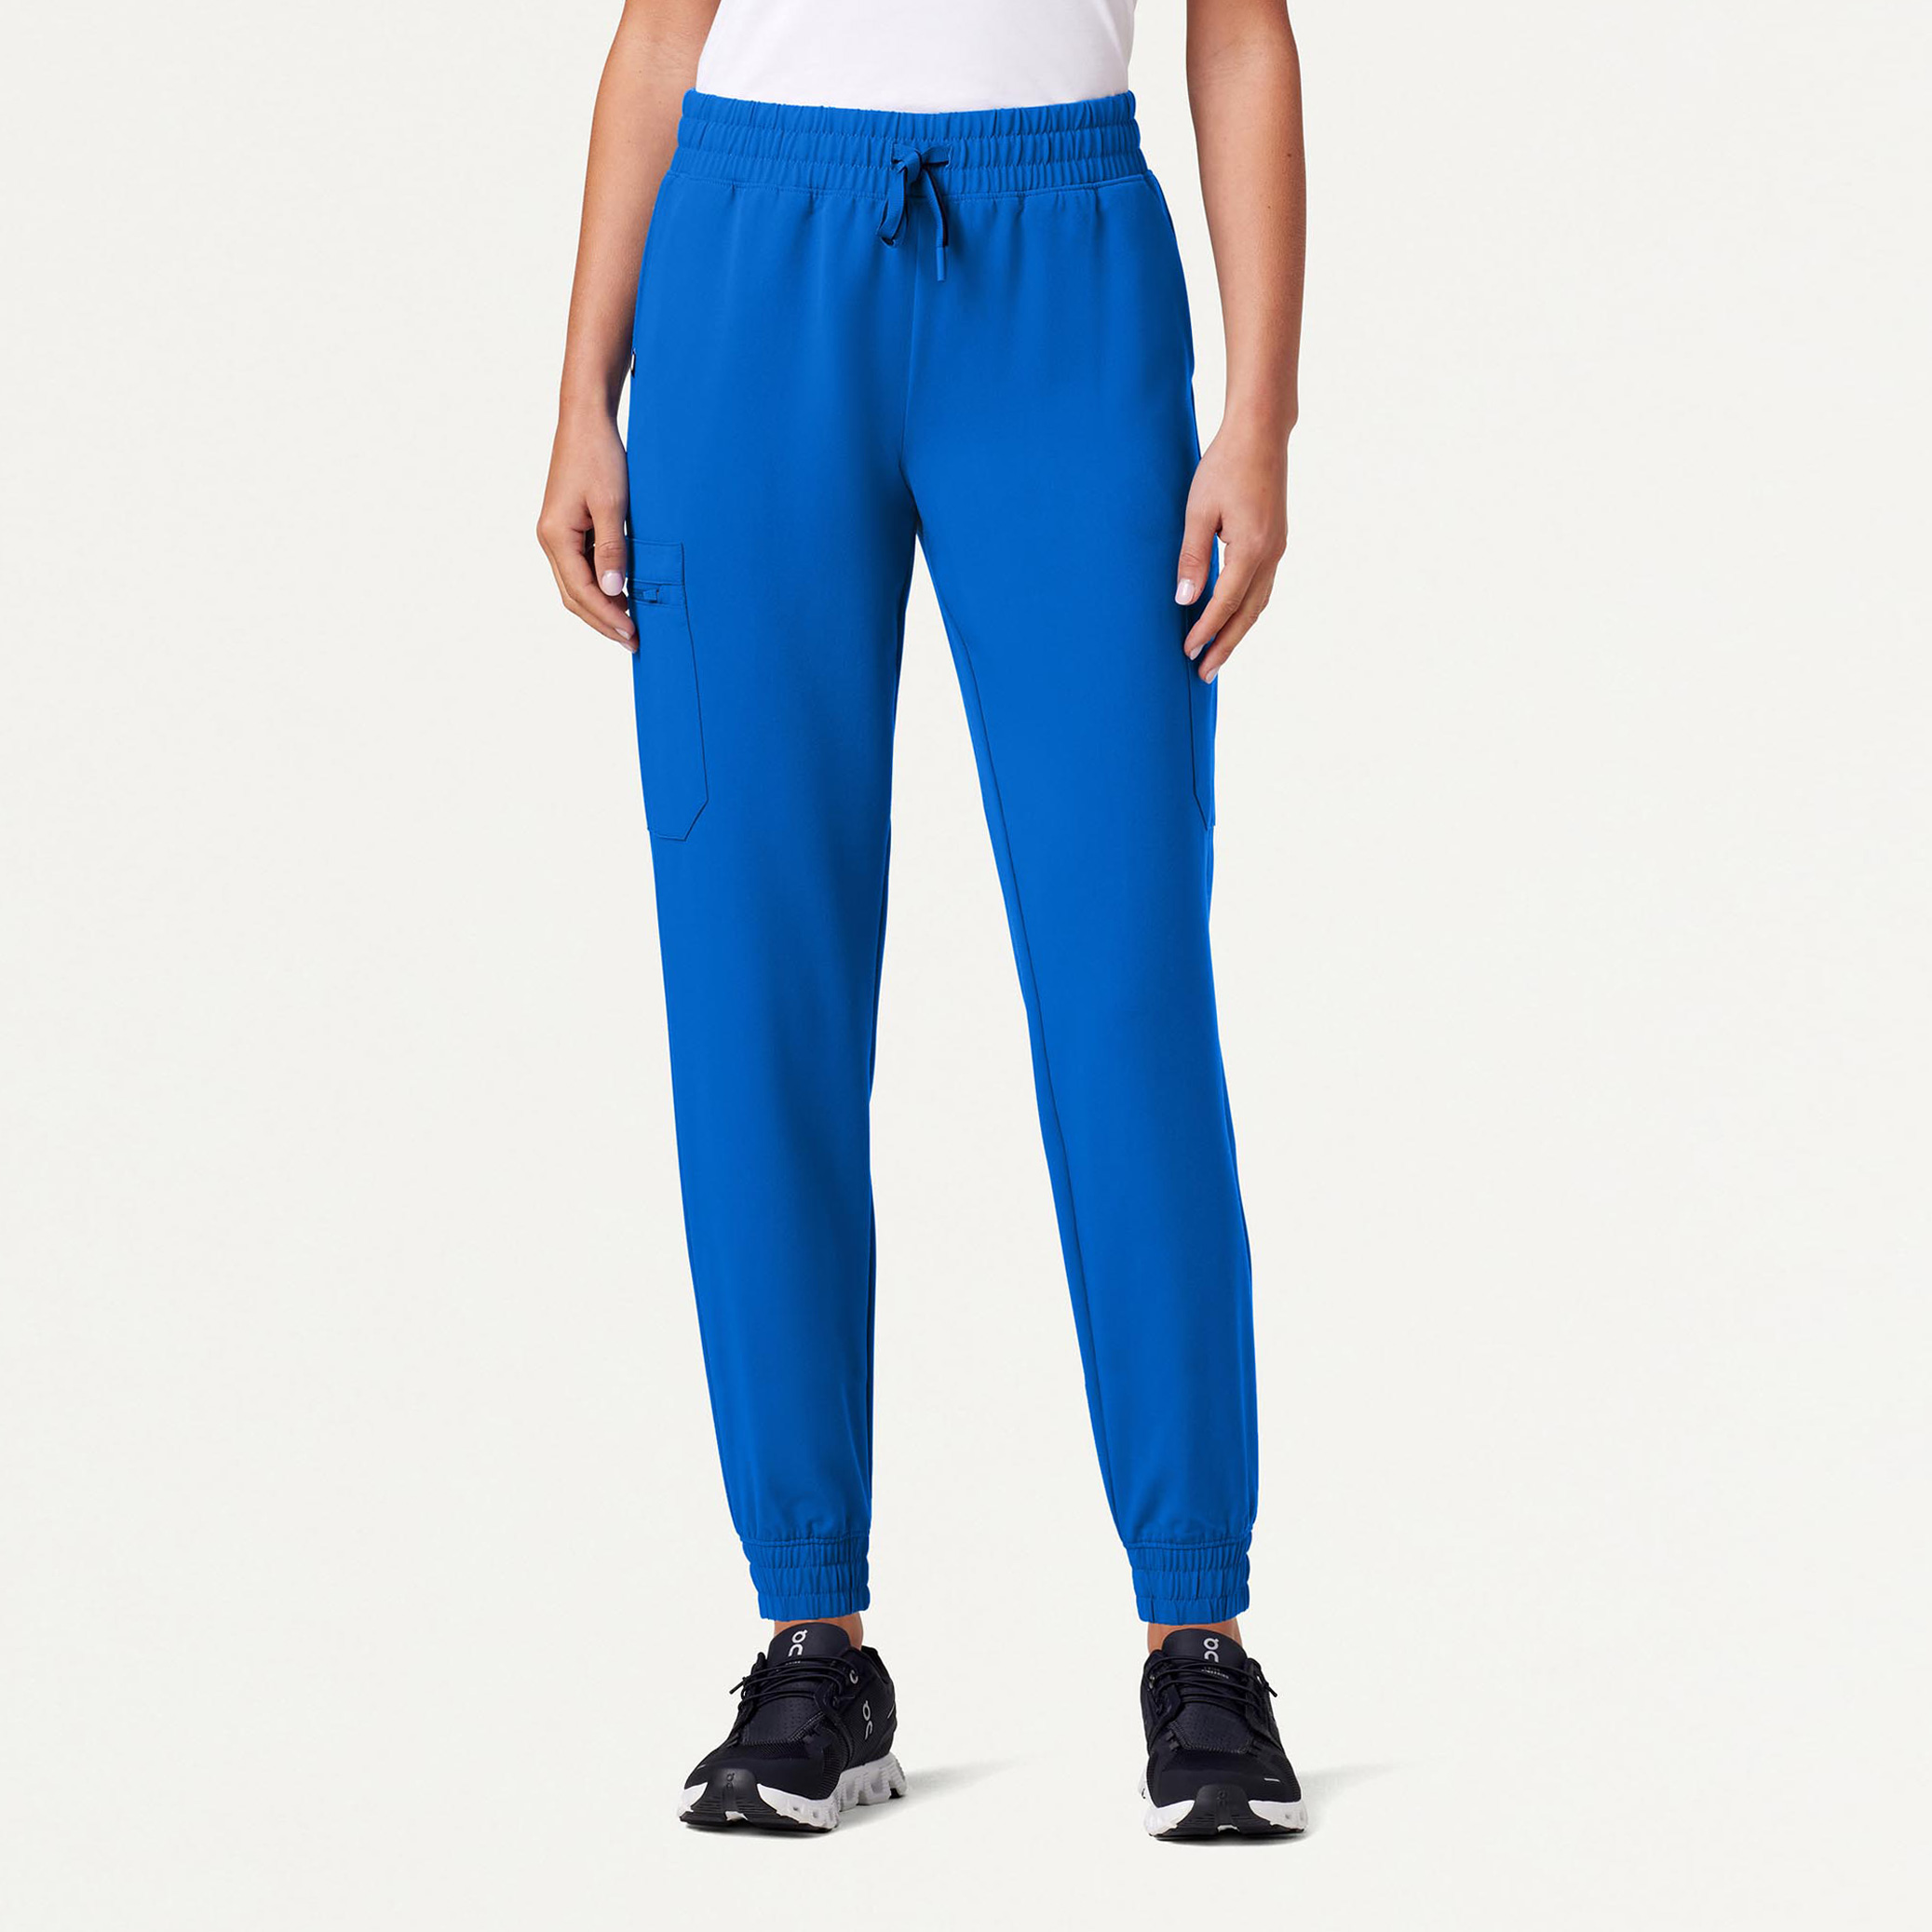 Pin on THEY'RE BACK: Zamora Joggers 2.0